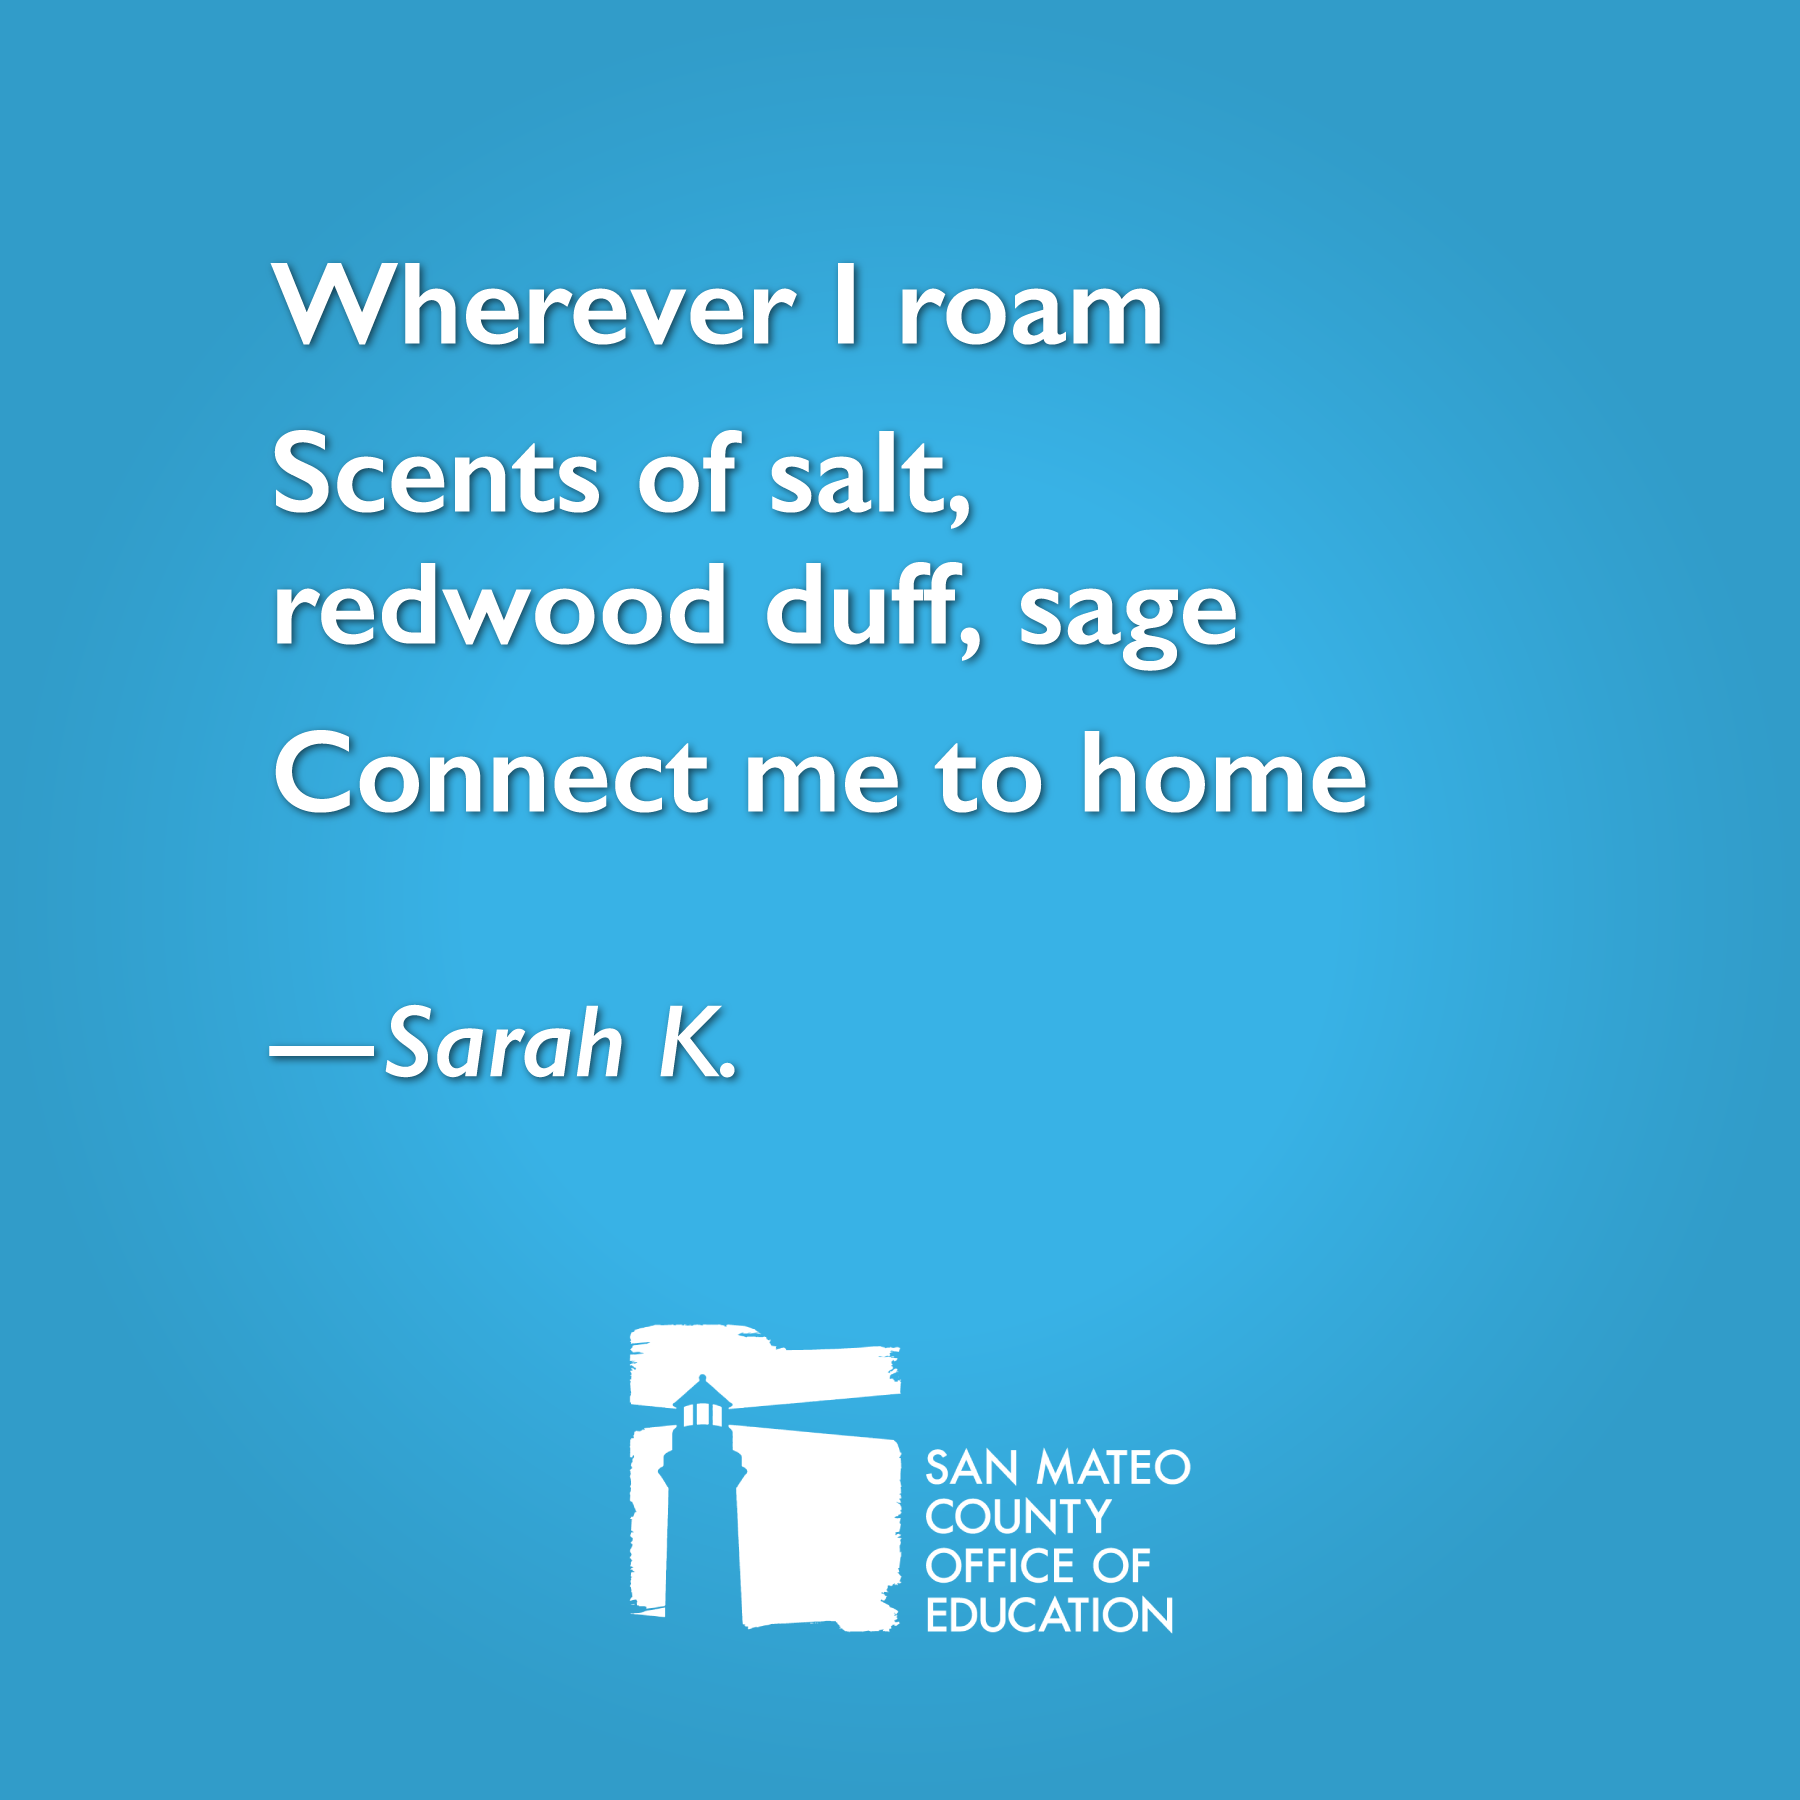 Wherever I roam Scents of salt, redwood duff, sage Connect me to home. Written by Sarah K.